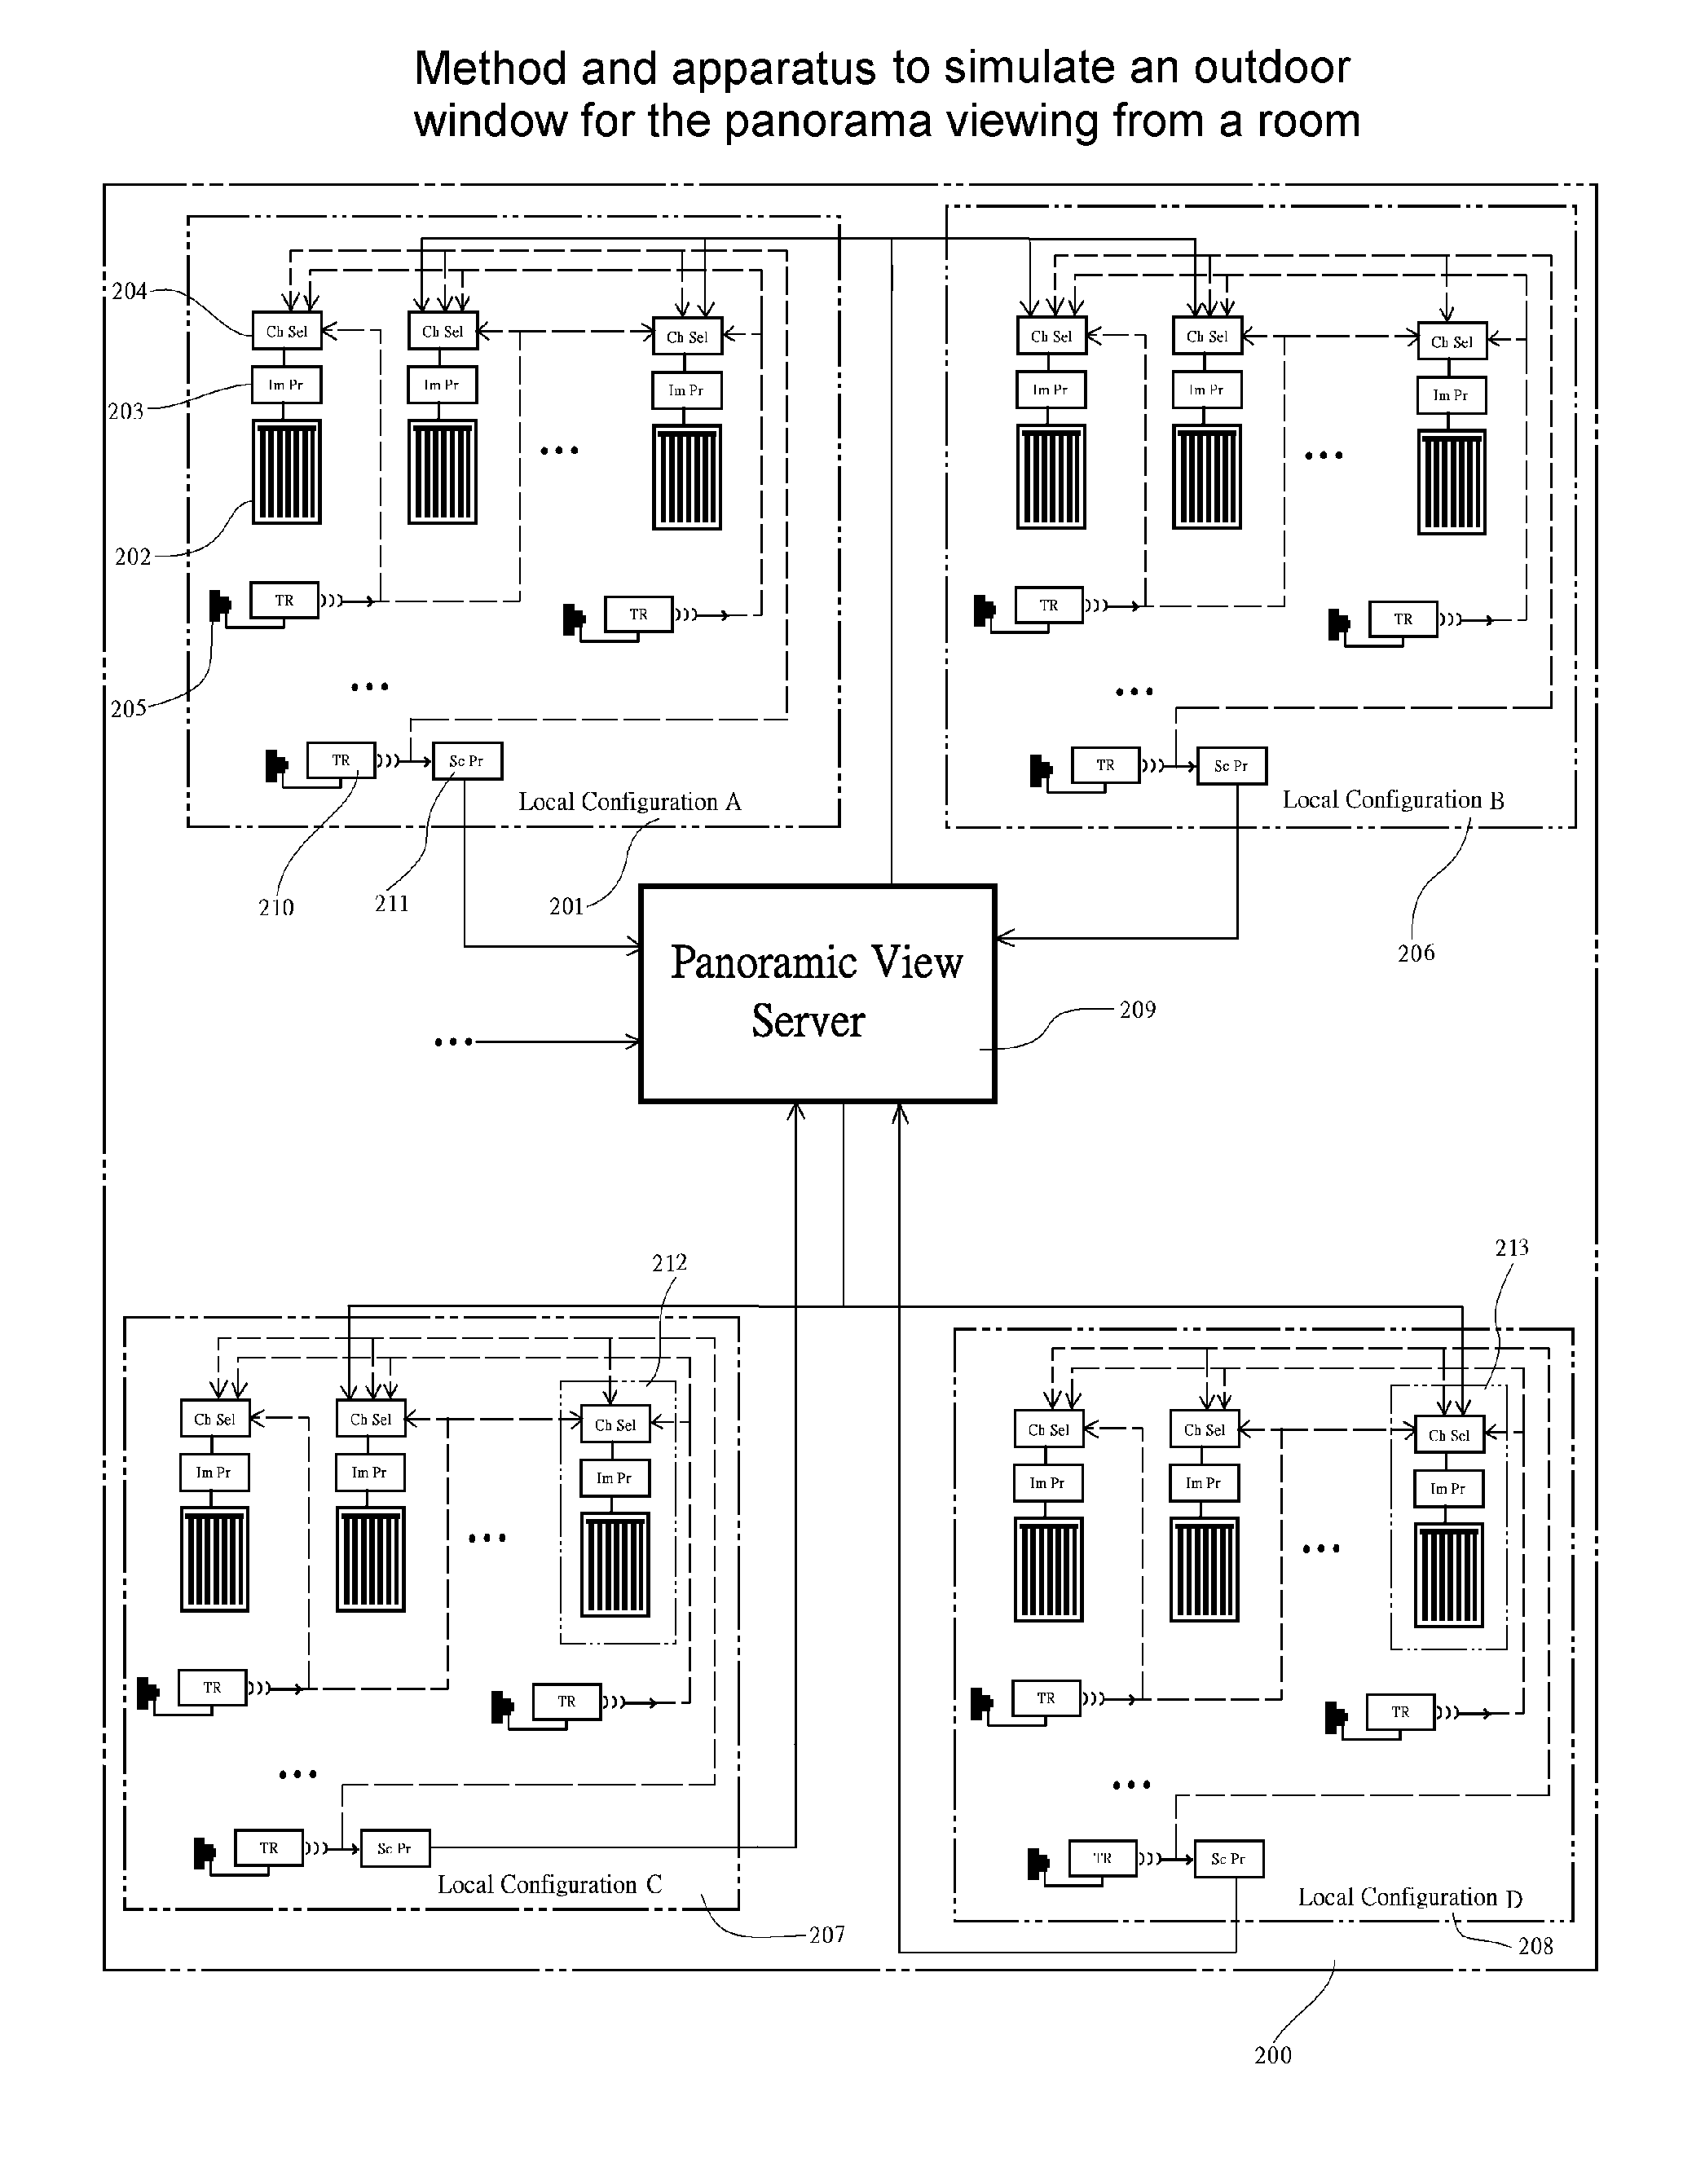 Method and apparatus to simulate an outdoor window for panorama viewing from a room